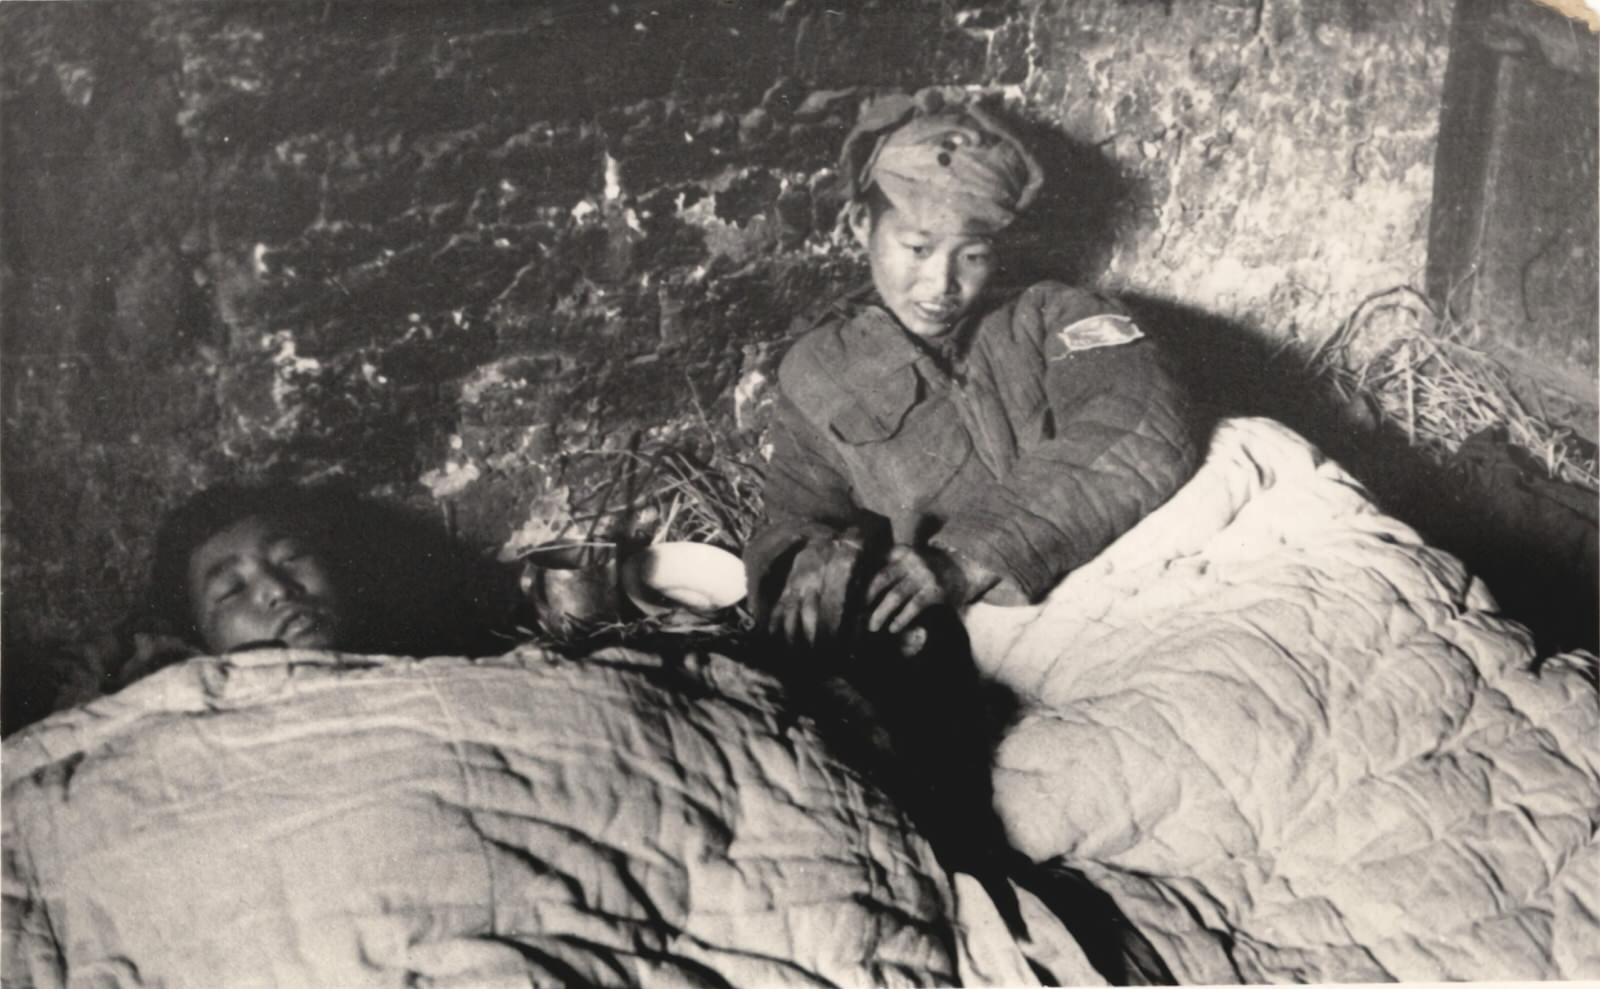 In the hospital of the New Fourth Army Storm Guerrilla Detachment north of Hankow (Hankou). 1937-1940